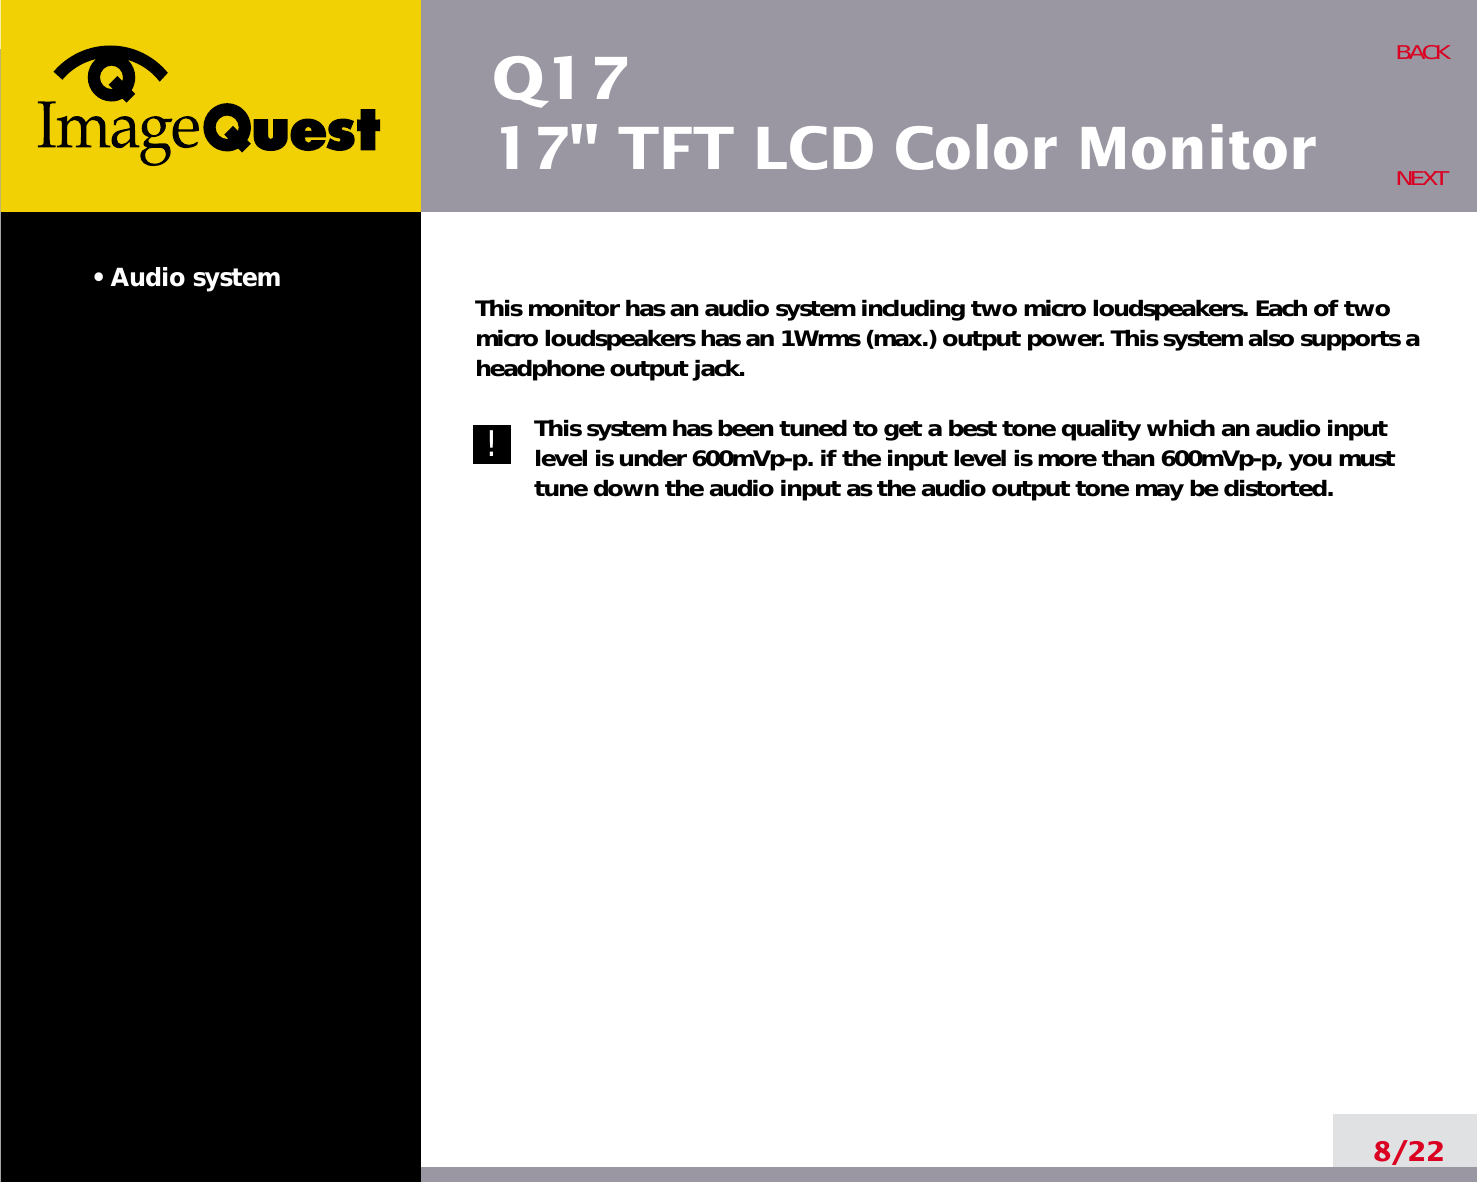 Q1717&quot; TFT LCD Color Monitor• Audio system This monitor has an audio system including two micro loudspeakers. Each of twomicro loudspeakers has an 1Wrms (max.) output power. This system also supports aheadphone output jack.This system has been tuned to get a best tone quality which an audio inputlevel is under 600mVp-p. if the input level is more than 600mVp-p, you musttune down the audio input as the audio output tone may be distorted.8/22BACKNEXT!!